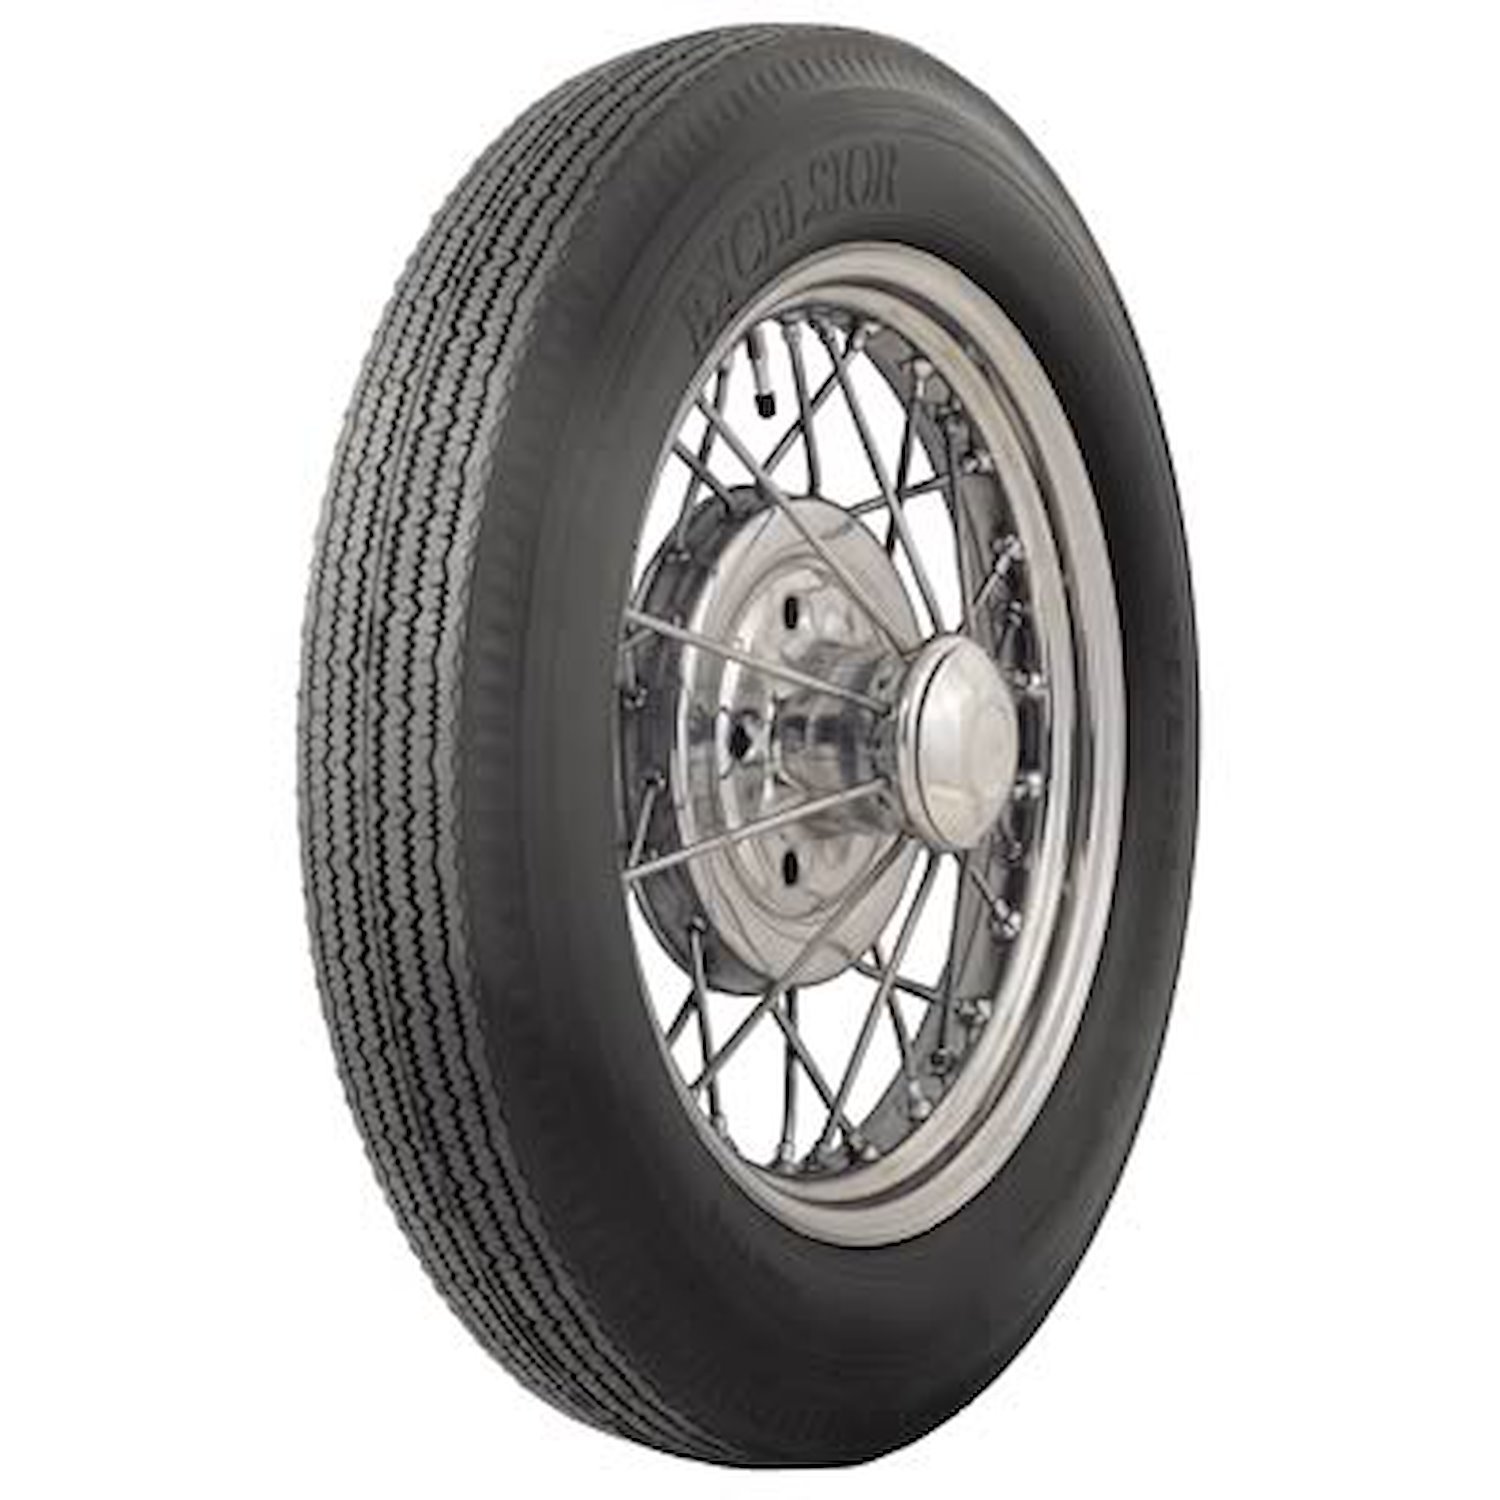 61980 Tire, Excelsior, 400/425-15